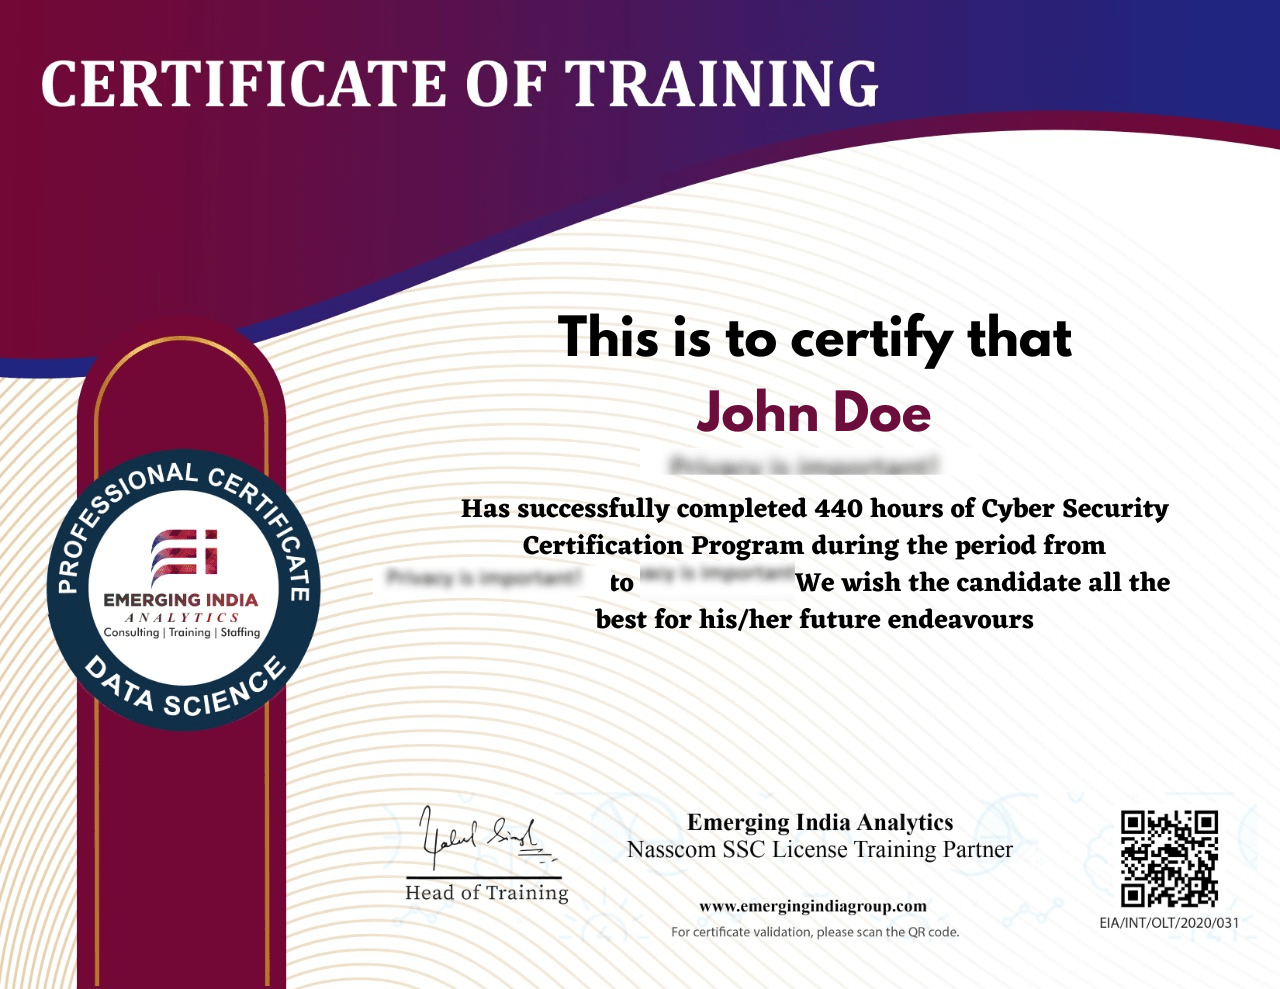 Emerging India Analytics 440 hours cybersecurity certificate sample